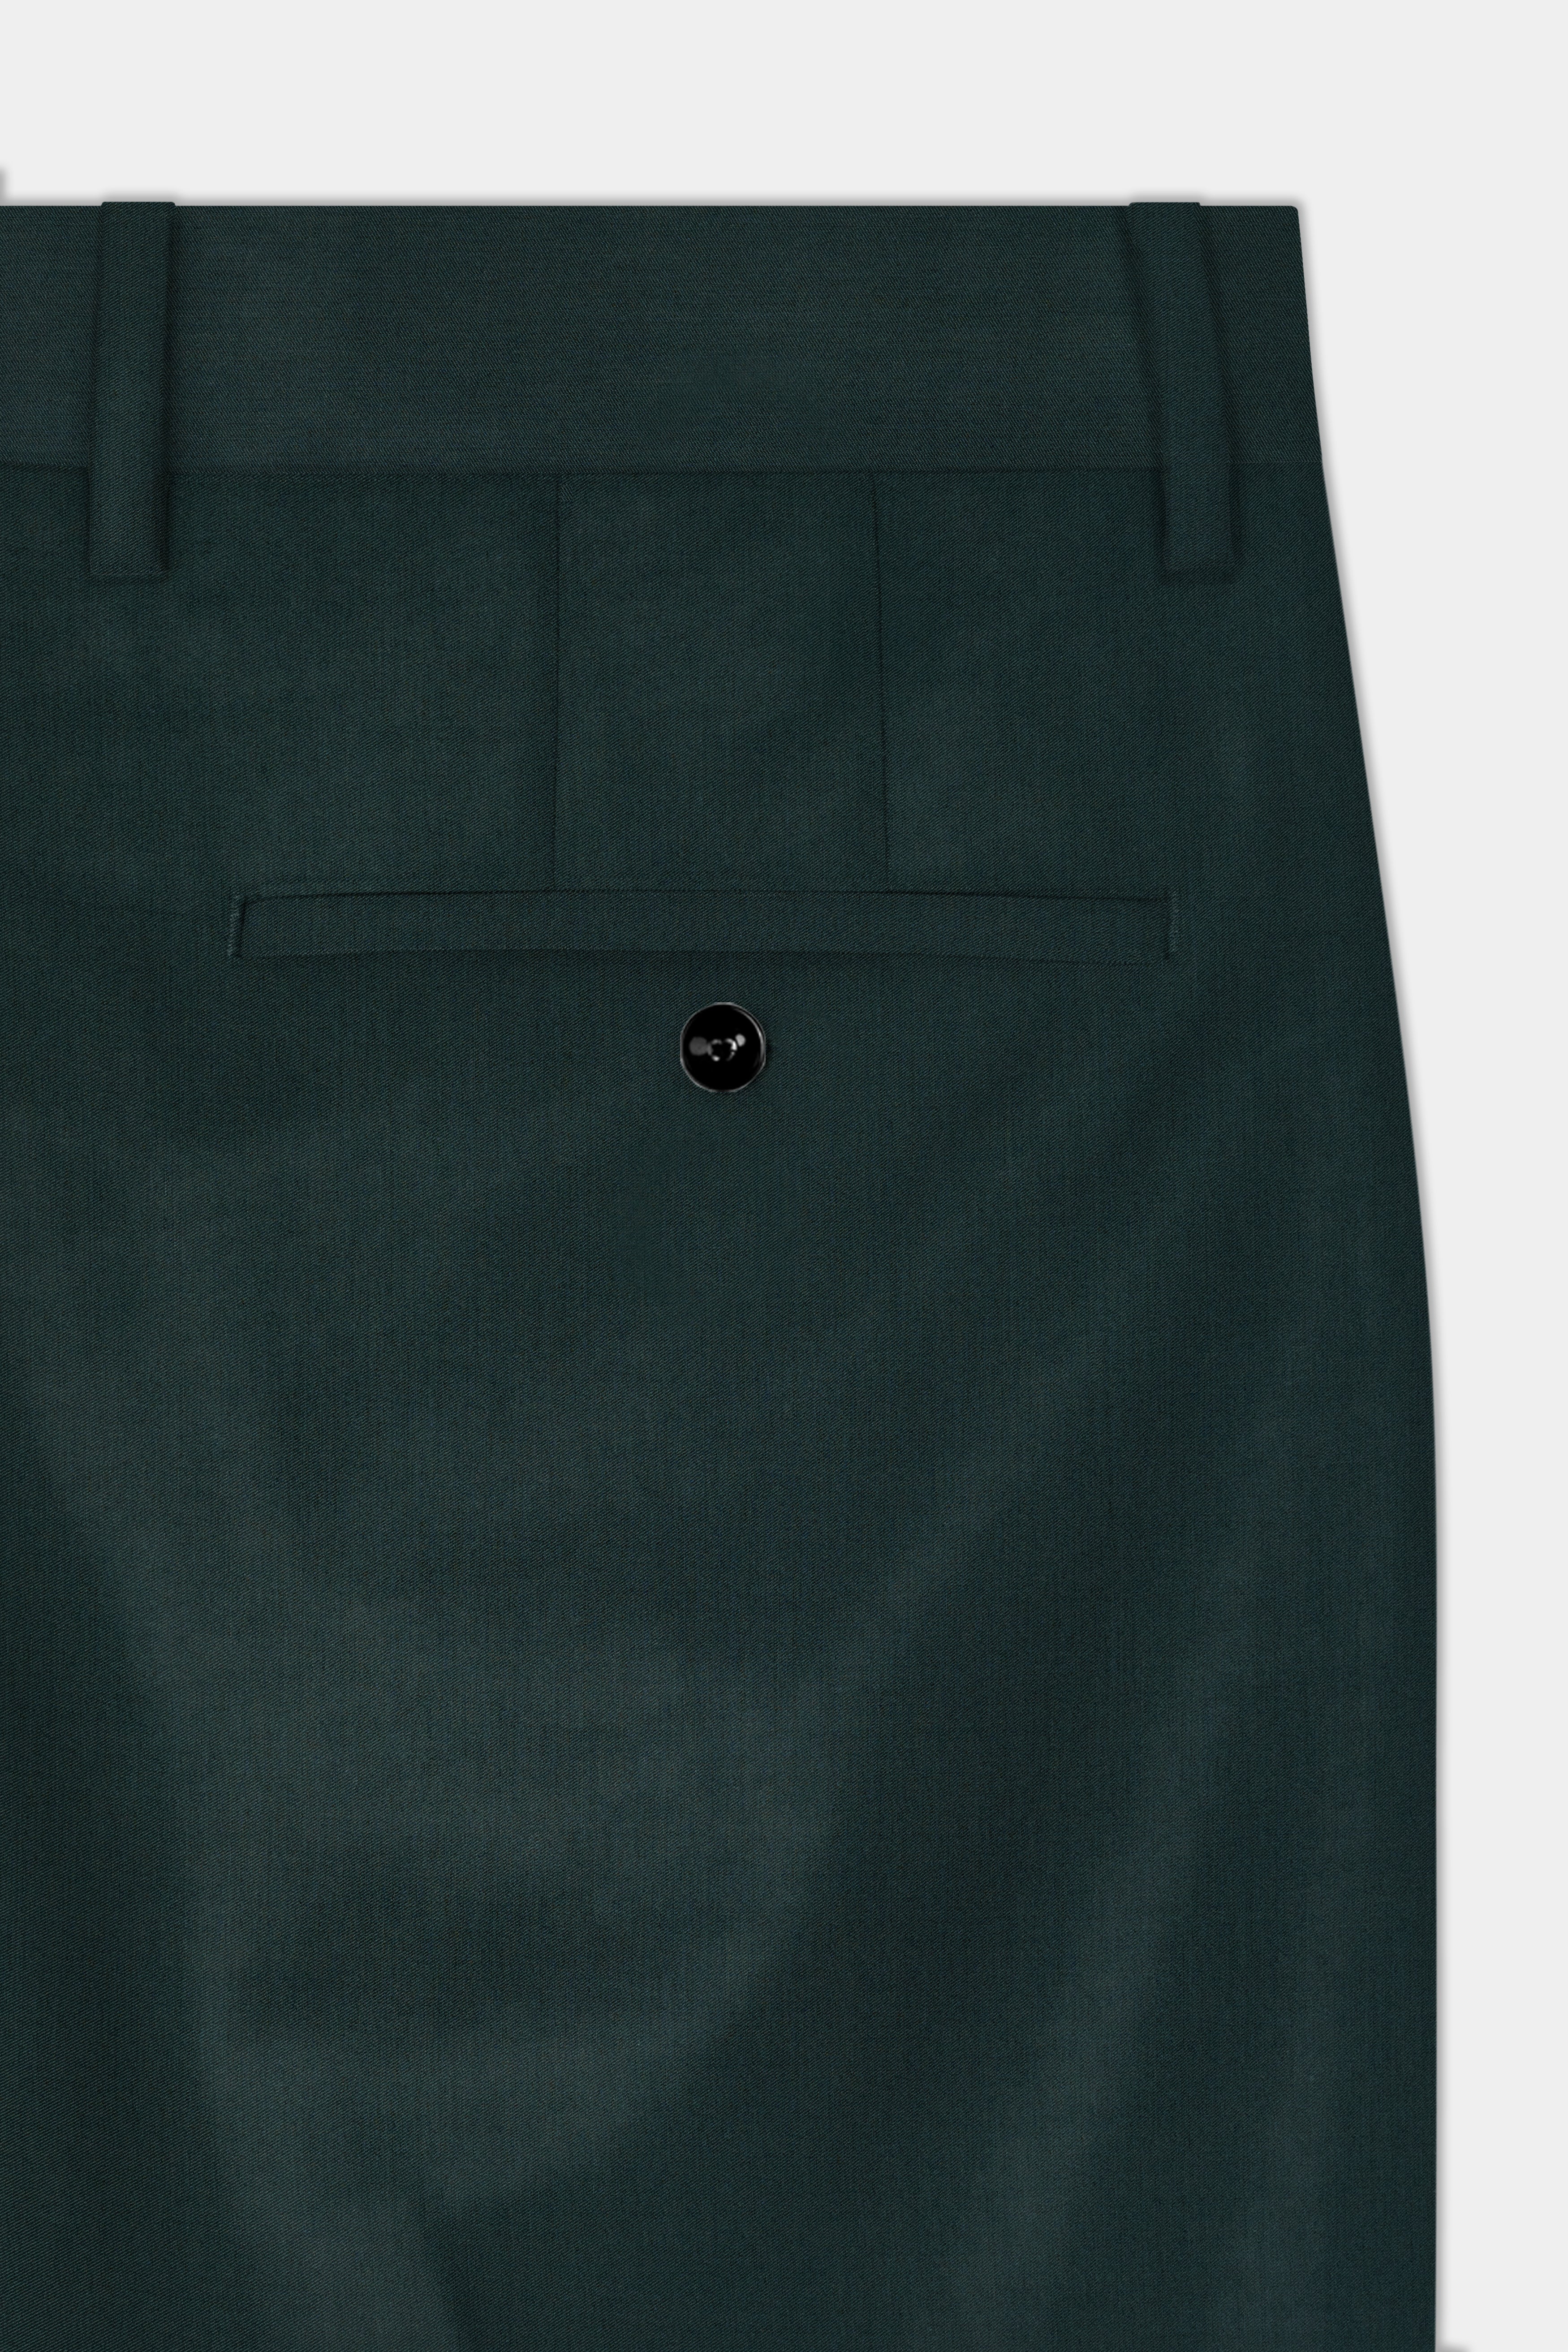 Timber Green Wool Rich Pant